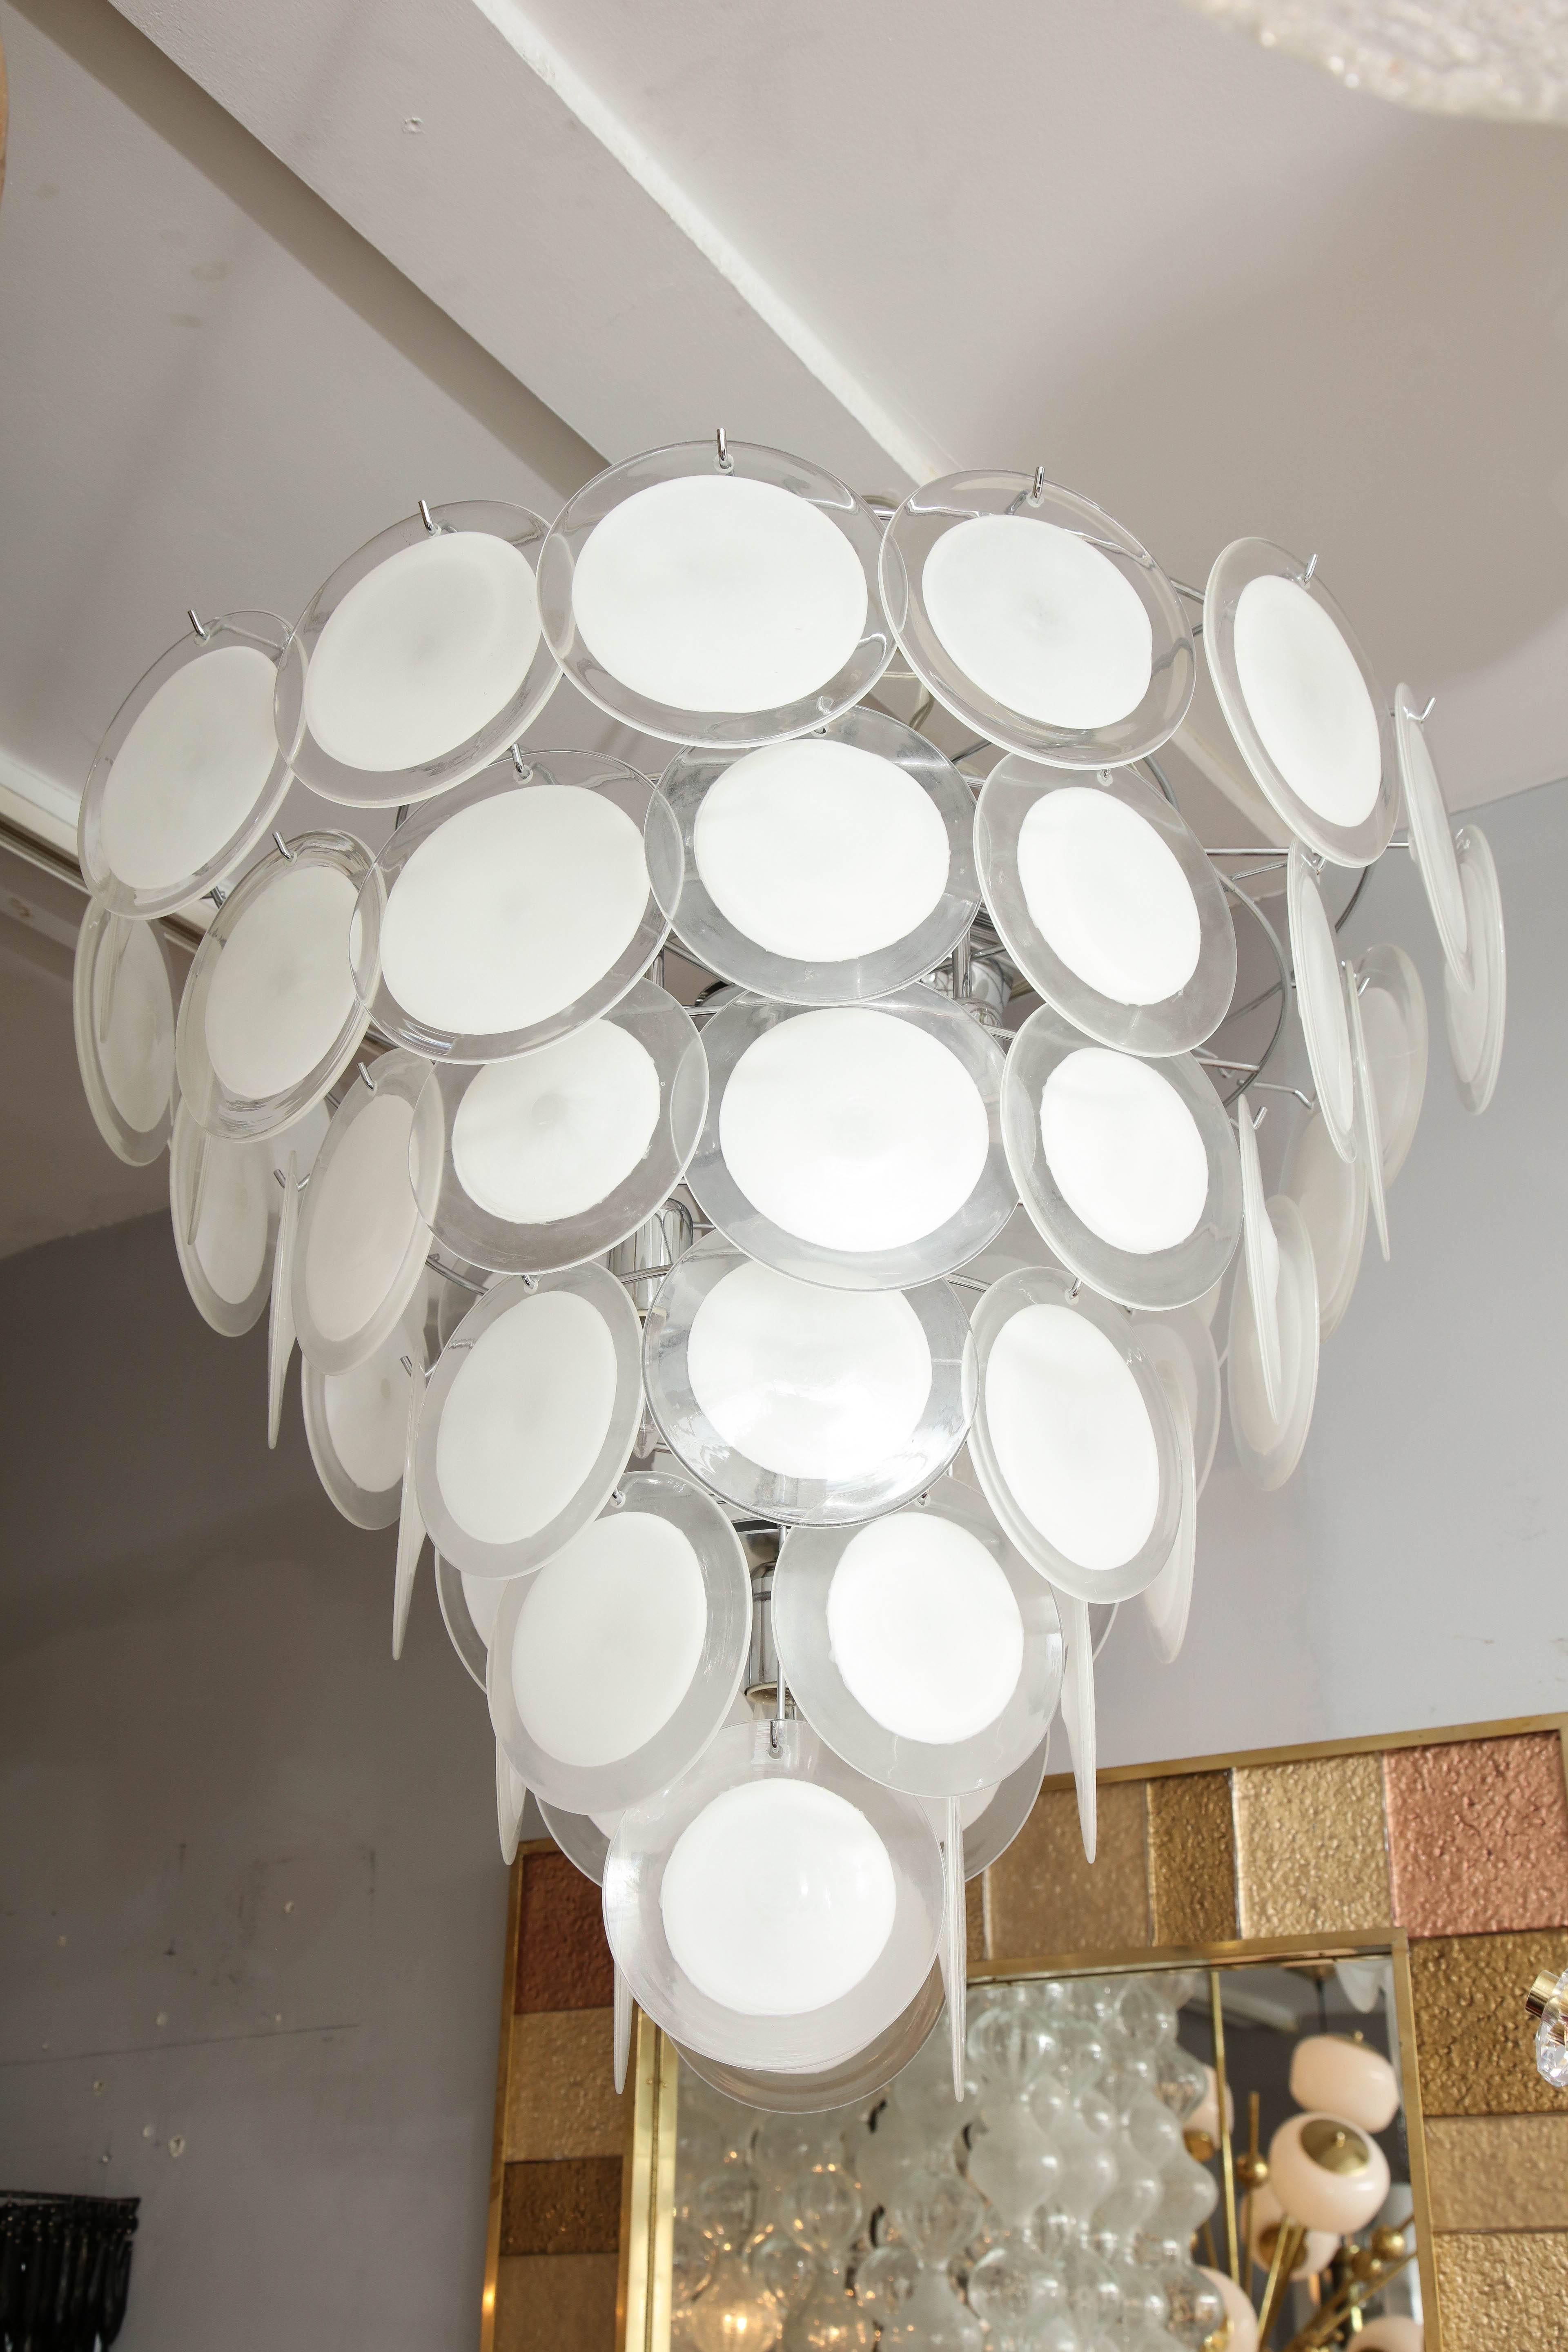 Custom white Murano glass disc tiered chandelier. Custom orders are available for different sizes, finishes, shapes and glass colors.